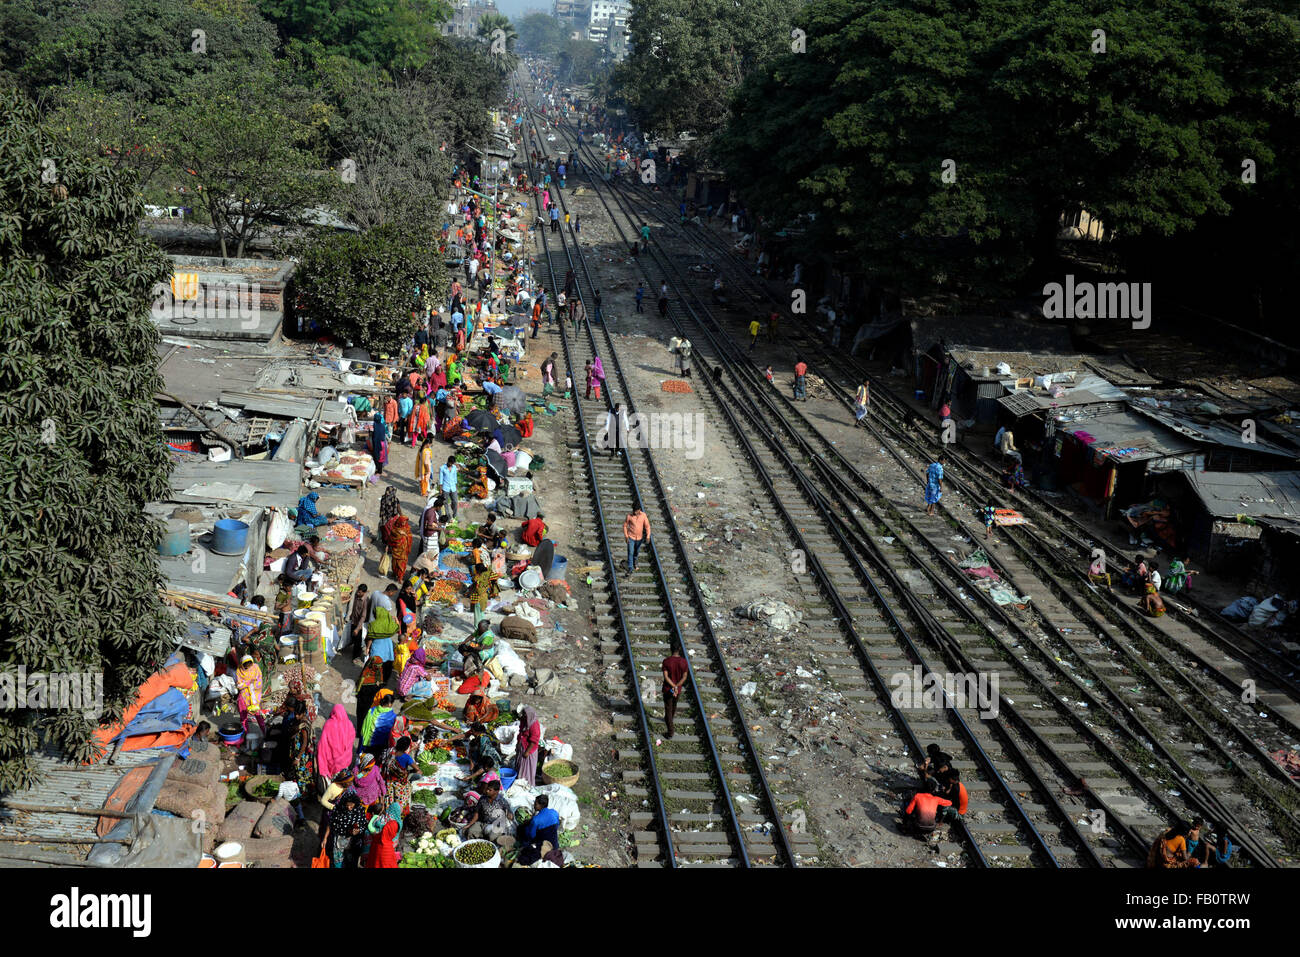 Dhaka. 7th Jan, 2016. Photo taken on Jan. 7, 2016 shows a market along a rail during a countrywide strike called by Bangladesh Jamaat-e-Islami party in Dhaka, Bangladesh. Bangladesh's largest Islamist party enforced a nationwide dawn-to-dusk strike Thursday in protest of an apex court verdict that upheld death penalty for its chief for 1971 war crimes. Credit:  Shariful Islam/Xinhua/Alamy Live News Stock Photo